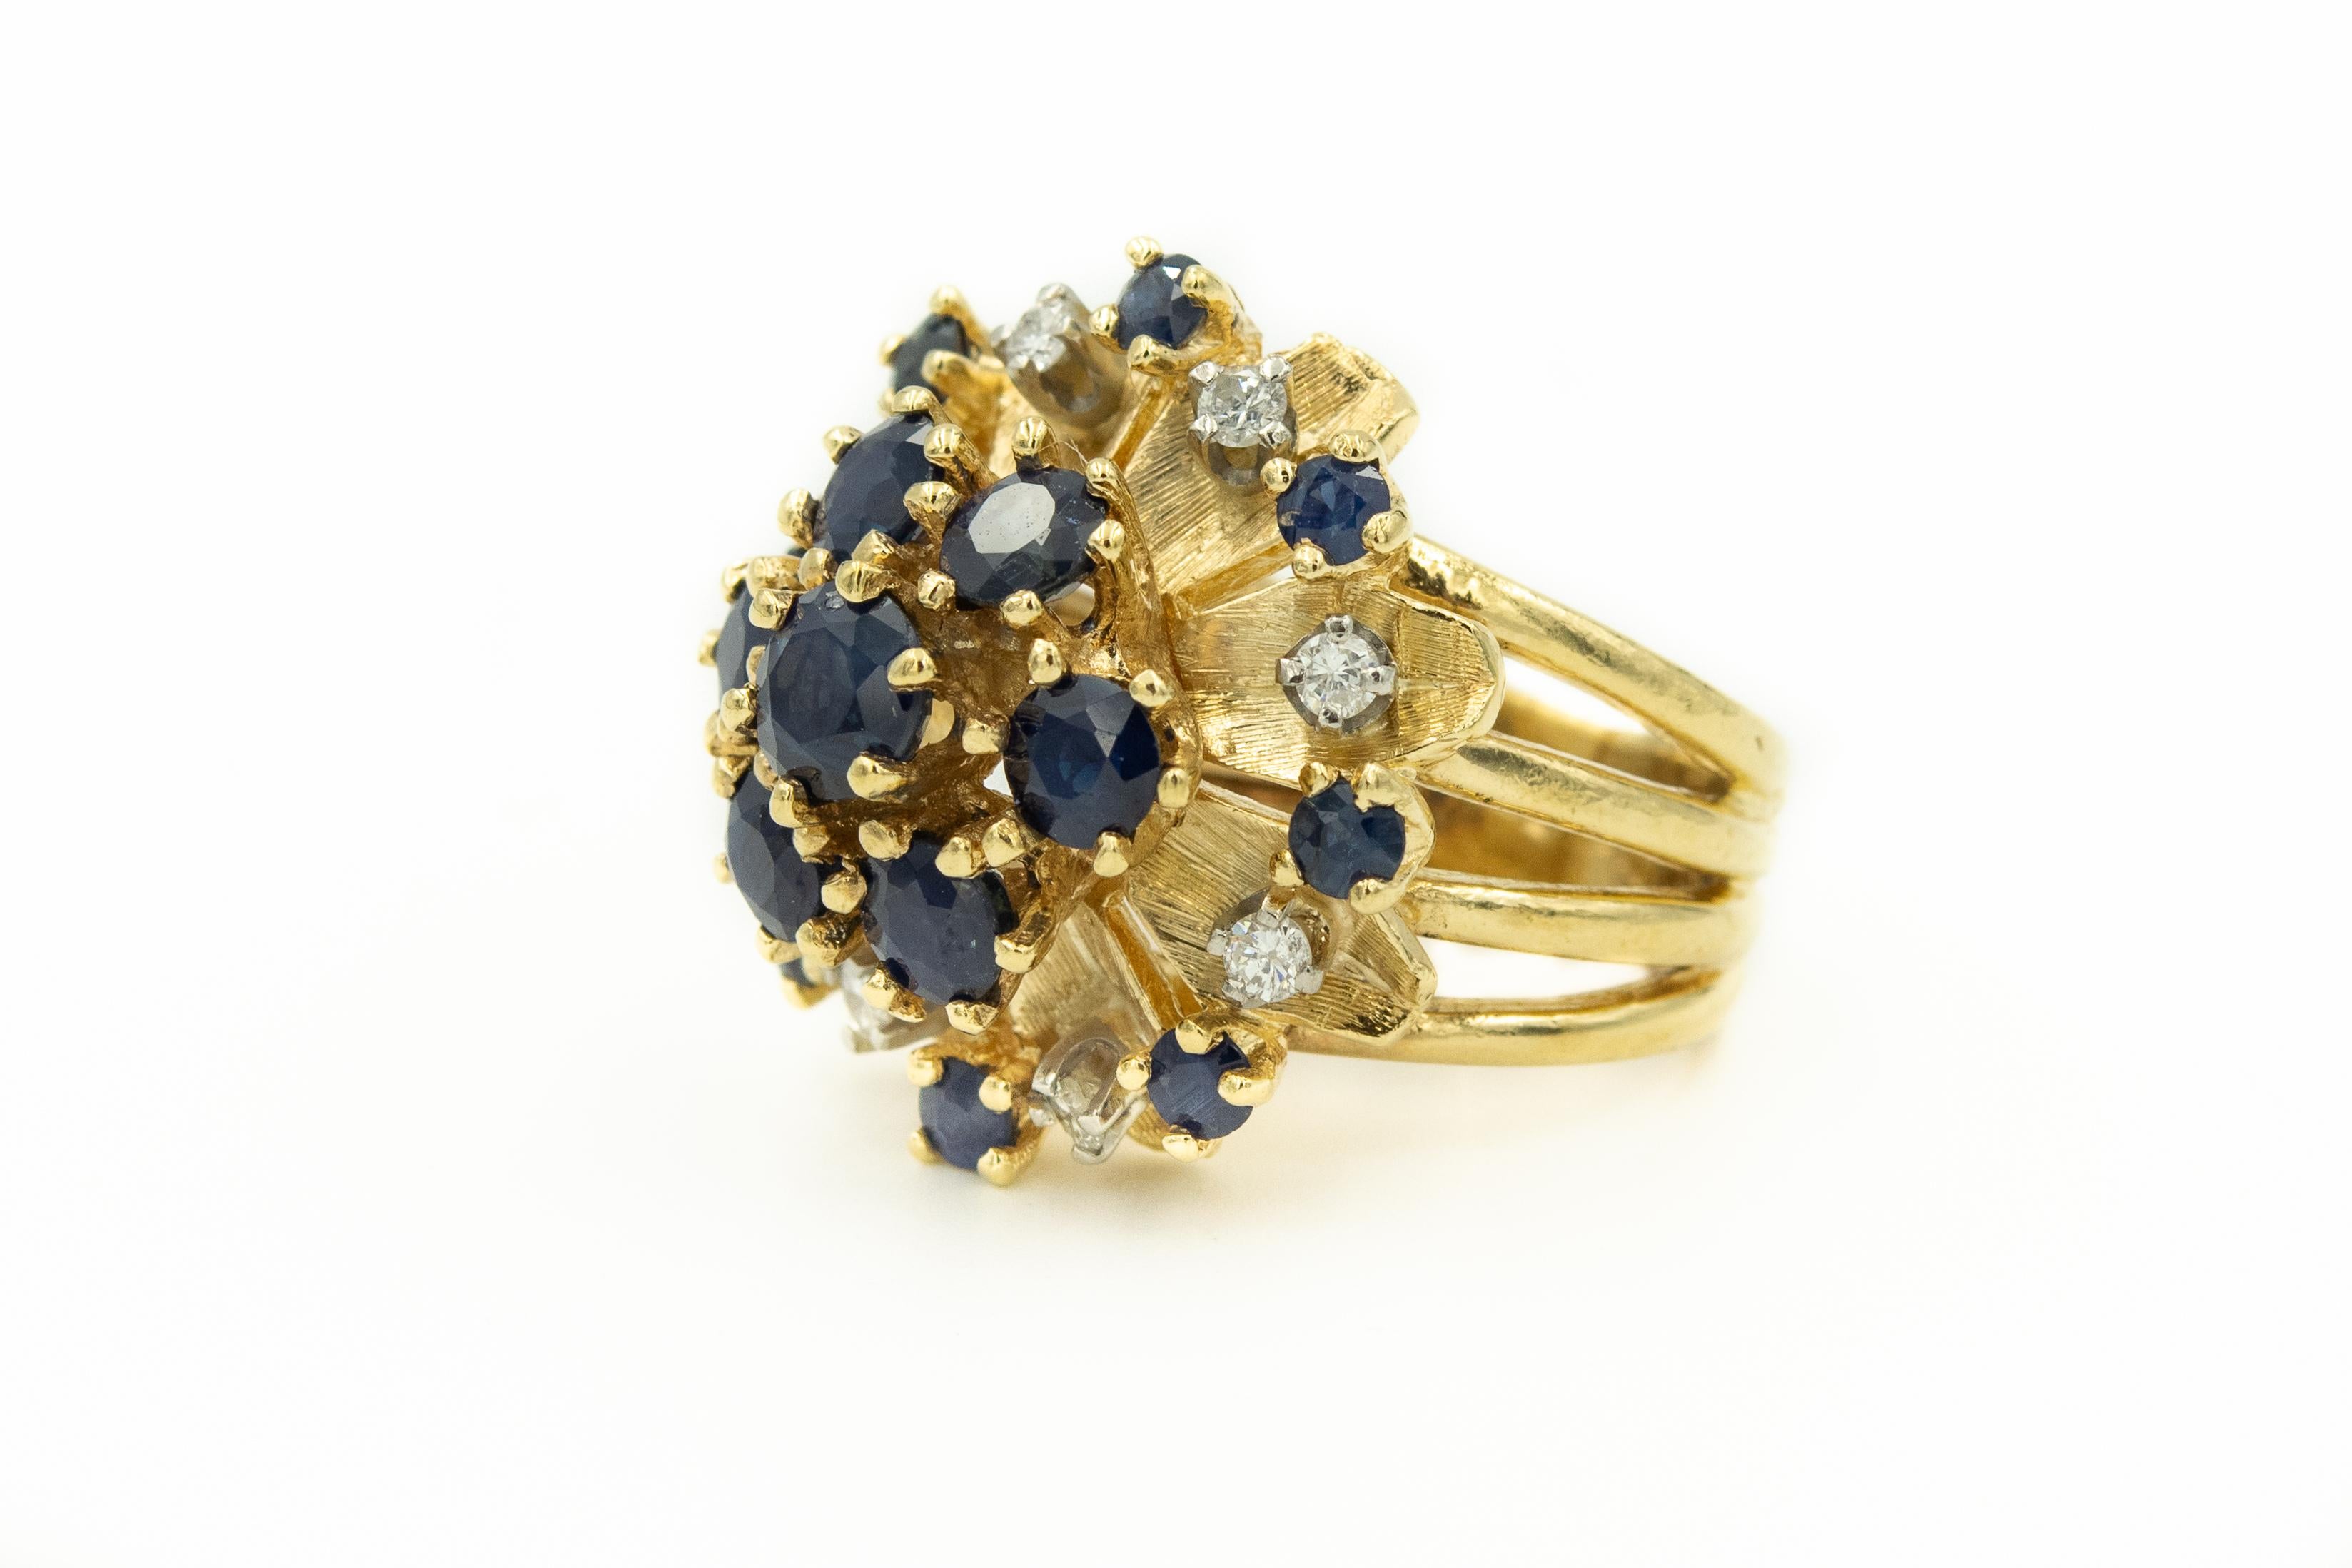 Mid 20th Century faceted sapphire and diamond flower dome cluster ring featuring a center section with larger sapphires surround by an outer area of leaves accented with smaller sapphires and diamonds.  

US size 4.5.

Marked 14k with and SA (on top